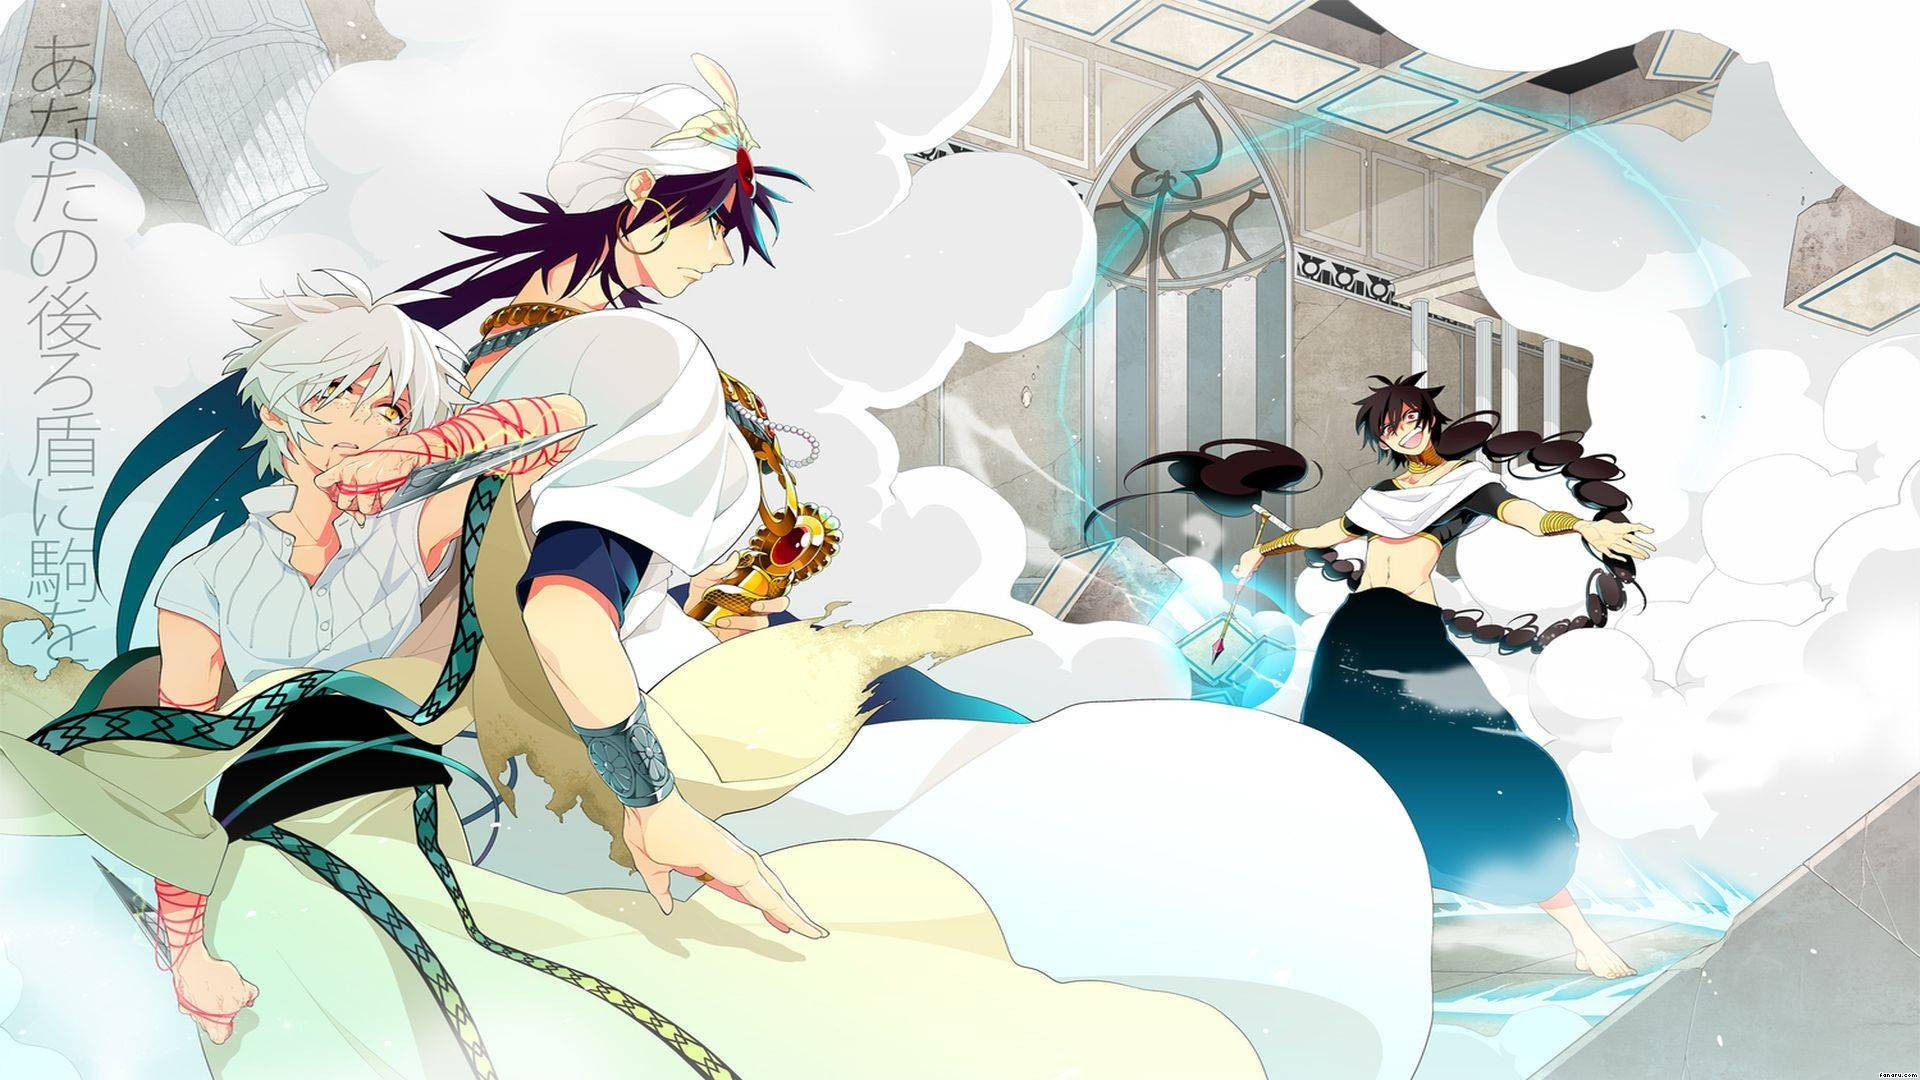 An Animated Scene From Magi: The Kingdom Of Magic Portraying Iconic Characters In A Vivid Fantasy Setting. Wallpaper